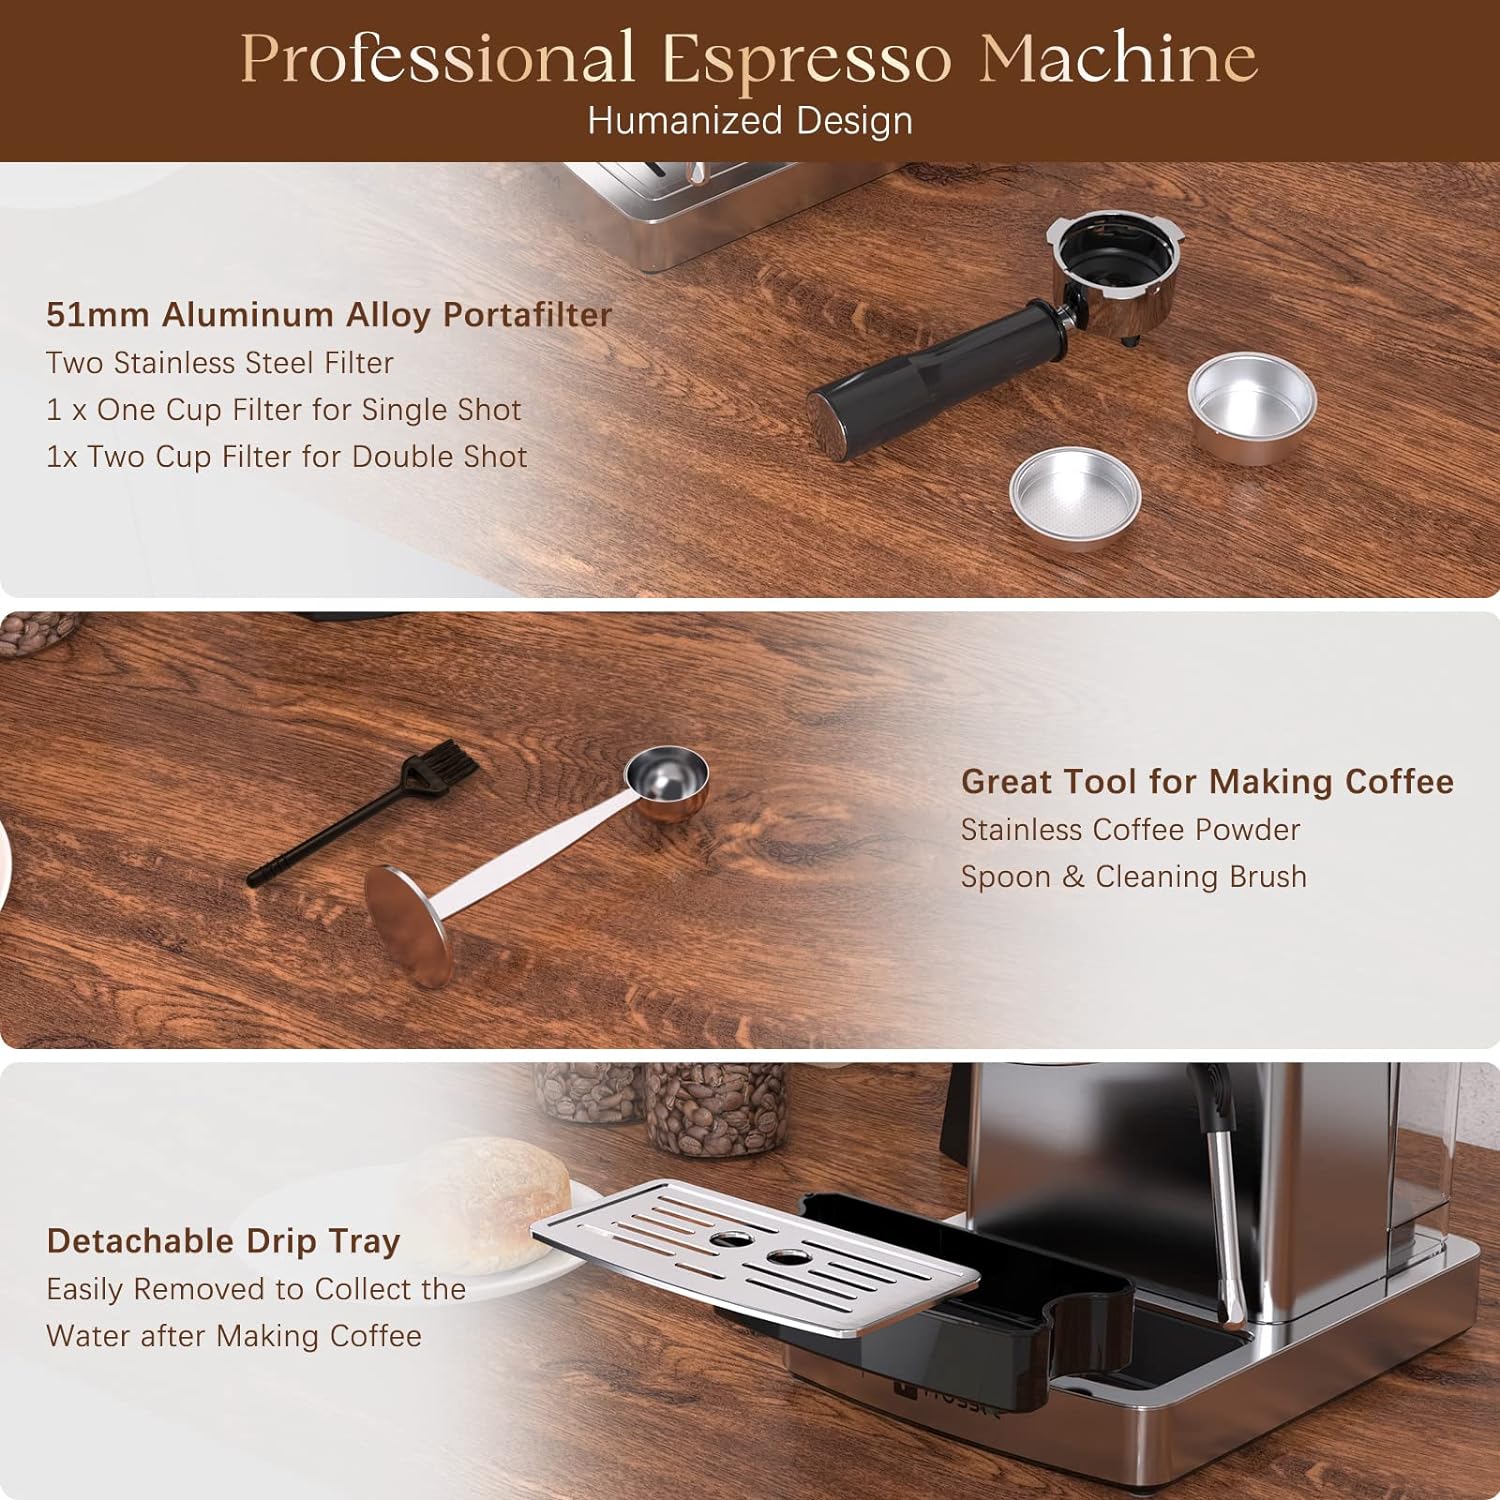 Frossvt Espresso Machine, 20 Bar Espresso Maker with Milk Frother Steam Wand for Latte and Cappuccino, Stainless Steel Coffee machines with 1.8L/60oz Water Tank for home, Sliver Coffee maker